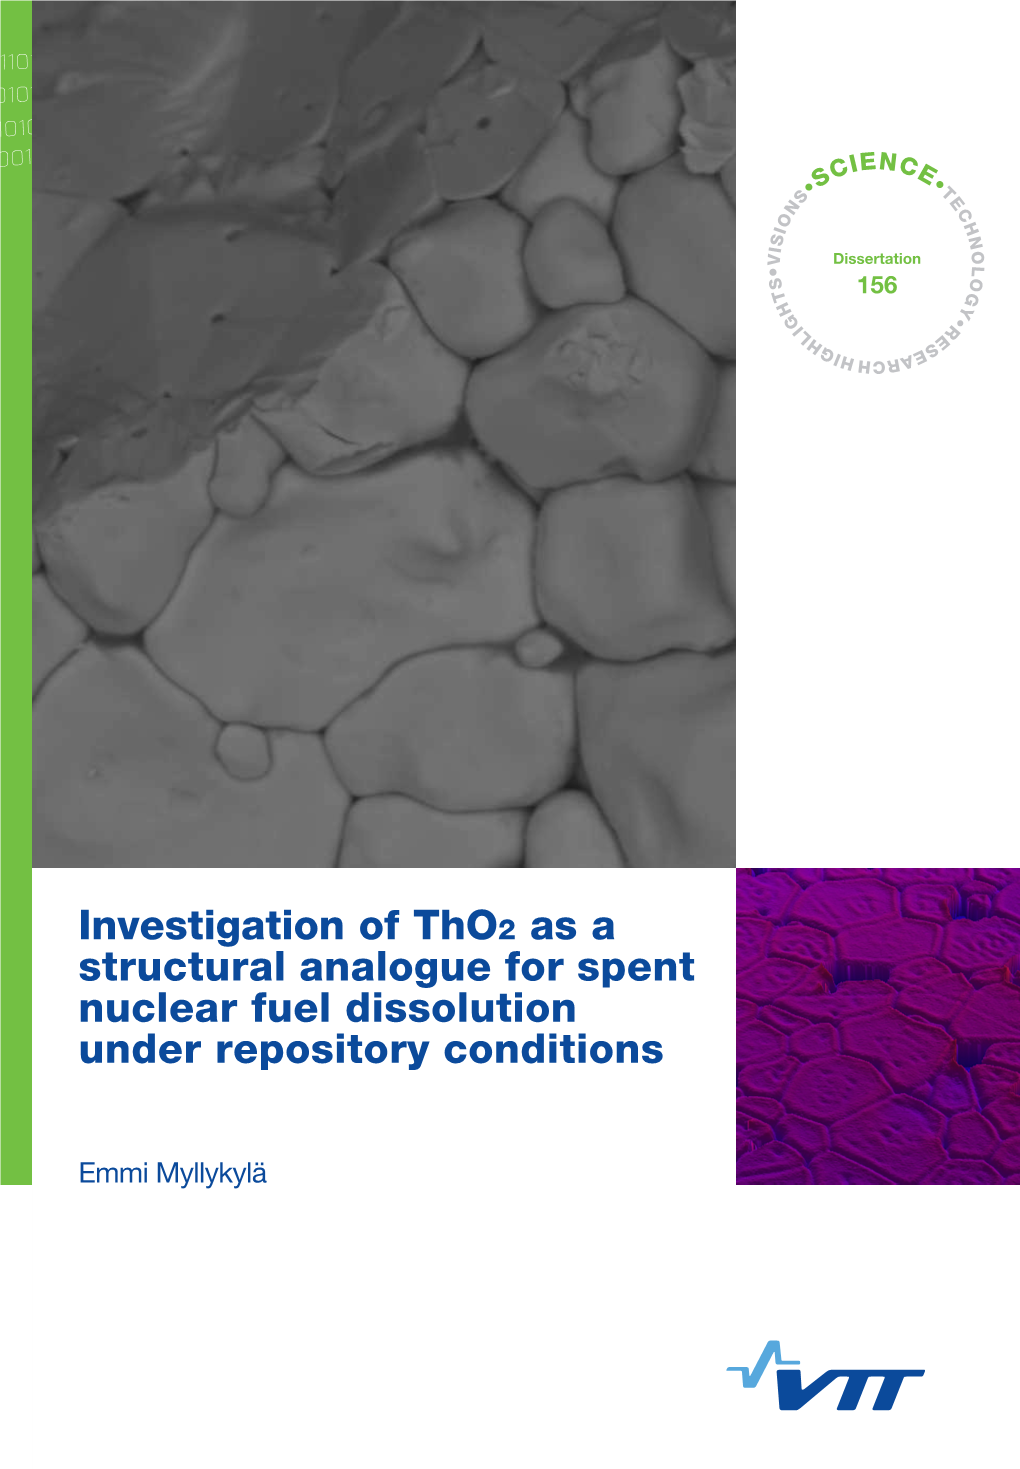 Investigation of Tho2 As a Structural Analogue for Spent Nuclear Fuel Dissolution Under Repository Conditions